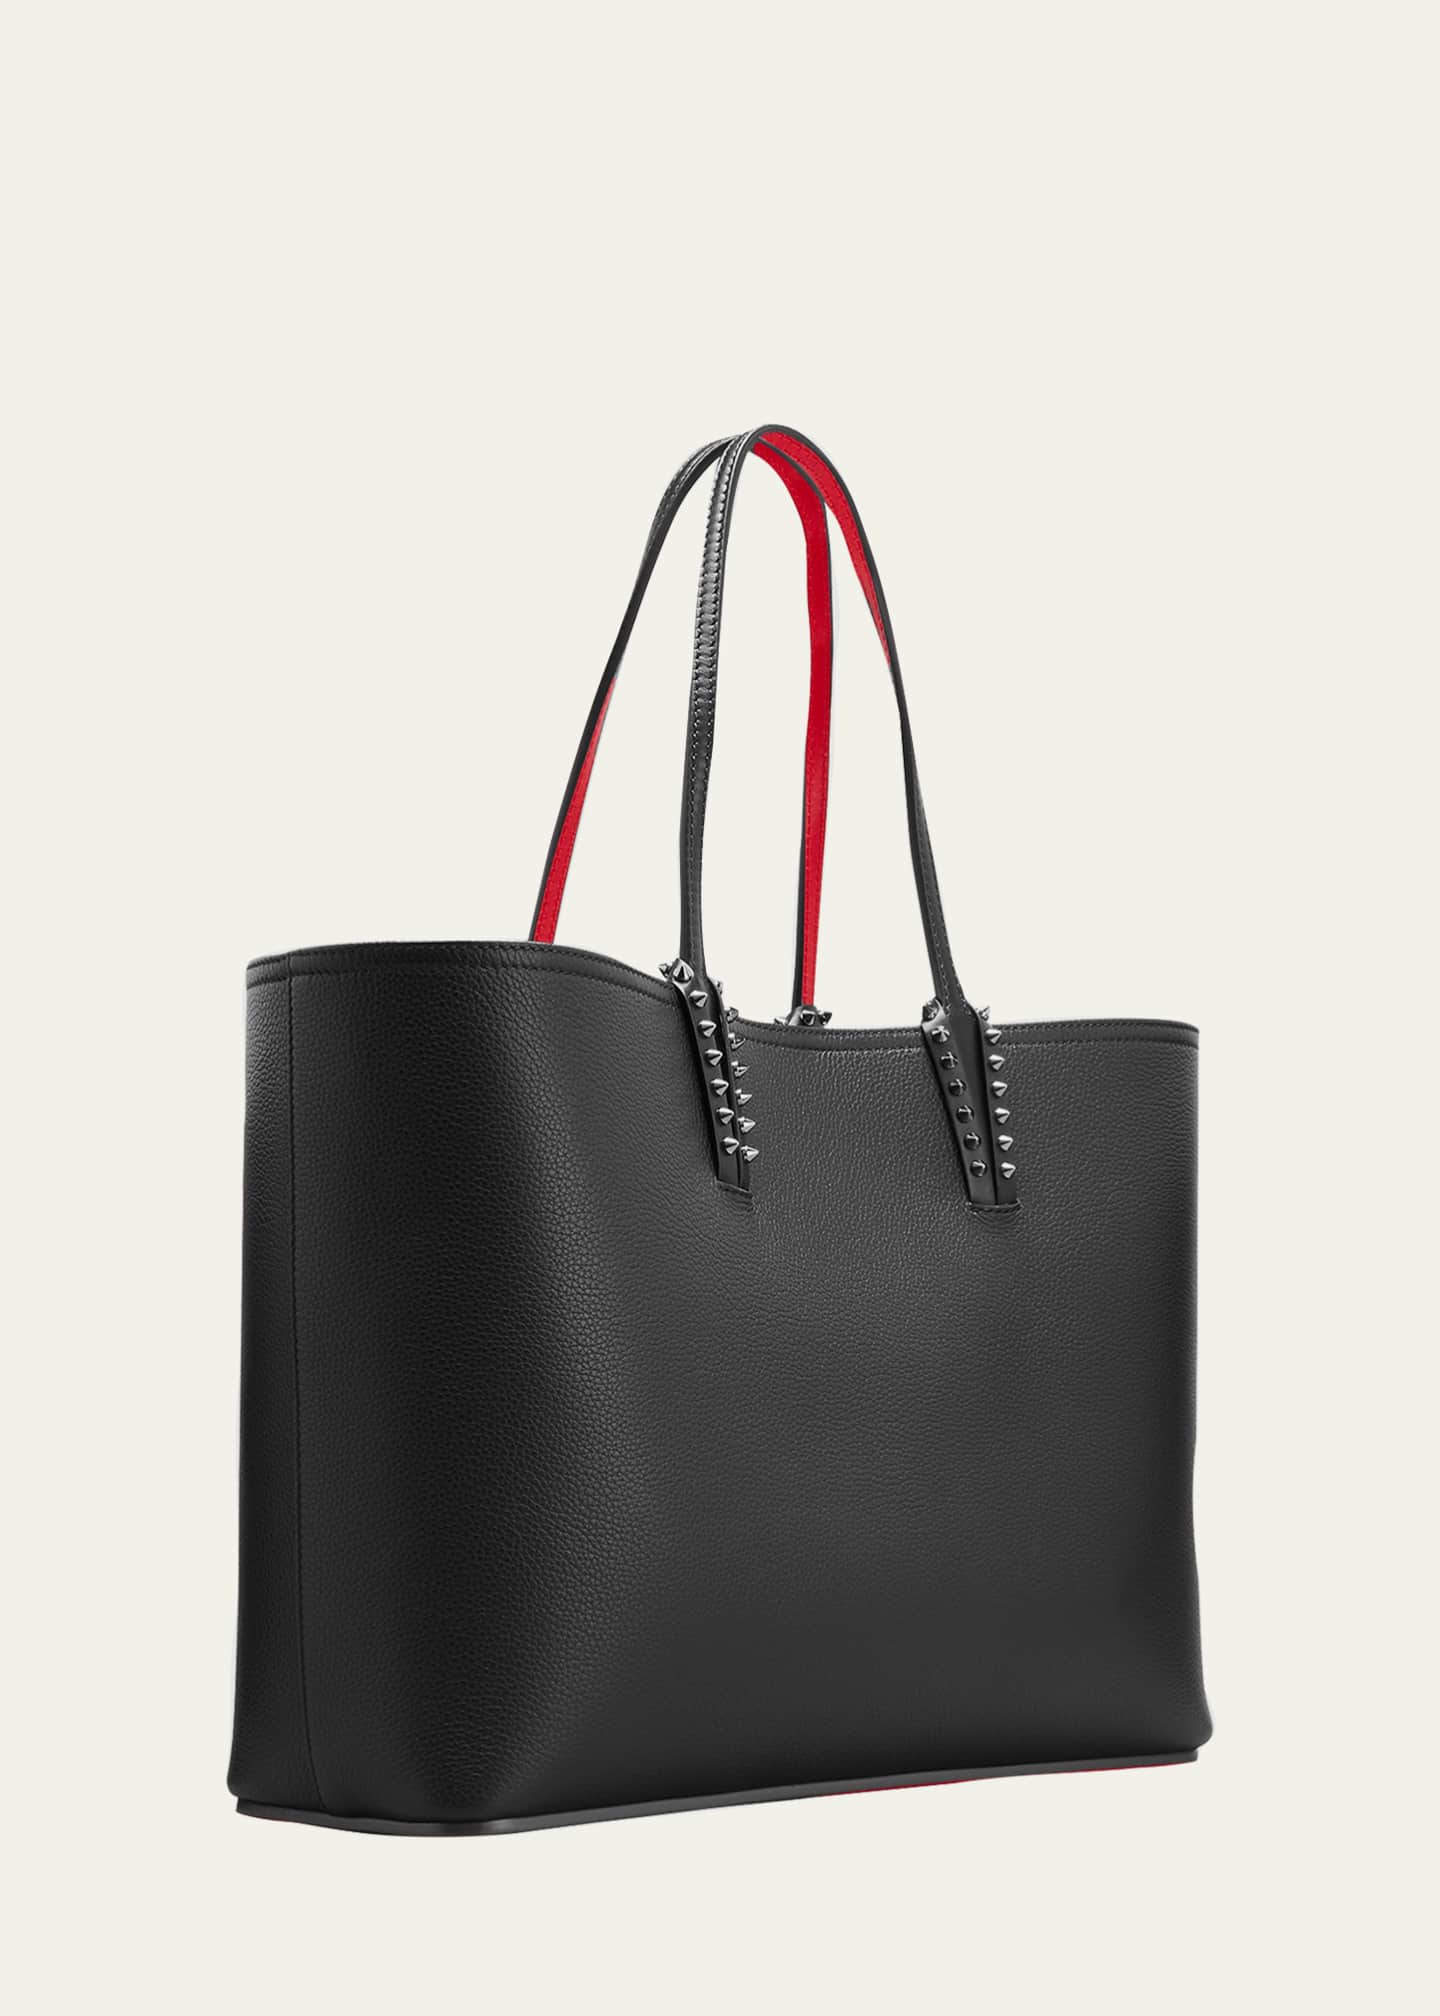 Christian Louboutin Cabata Tote in Grained Leather - Bergdorf Goodman